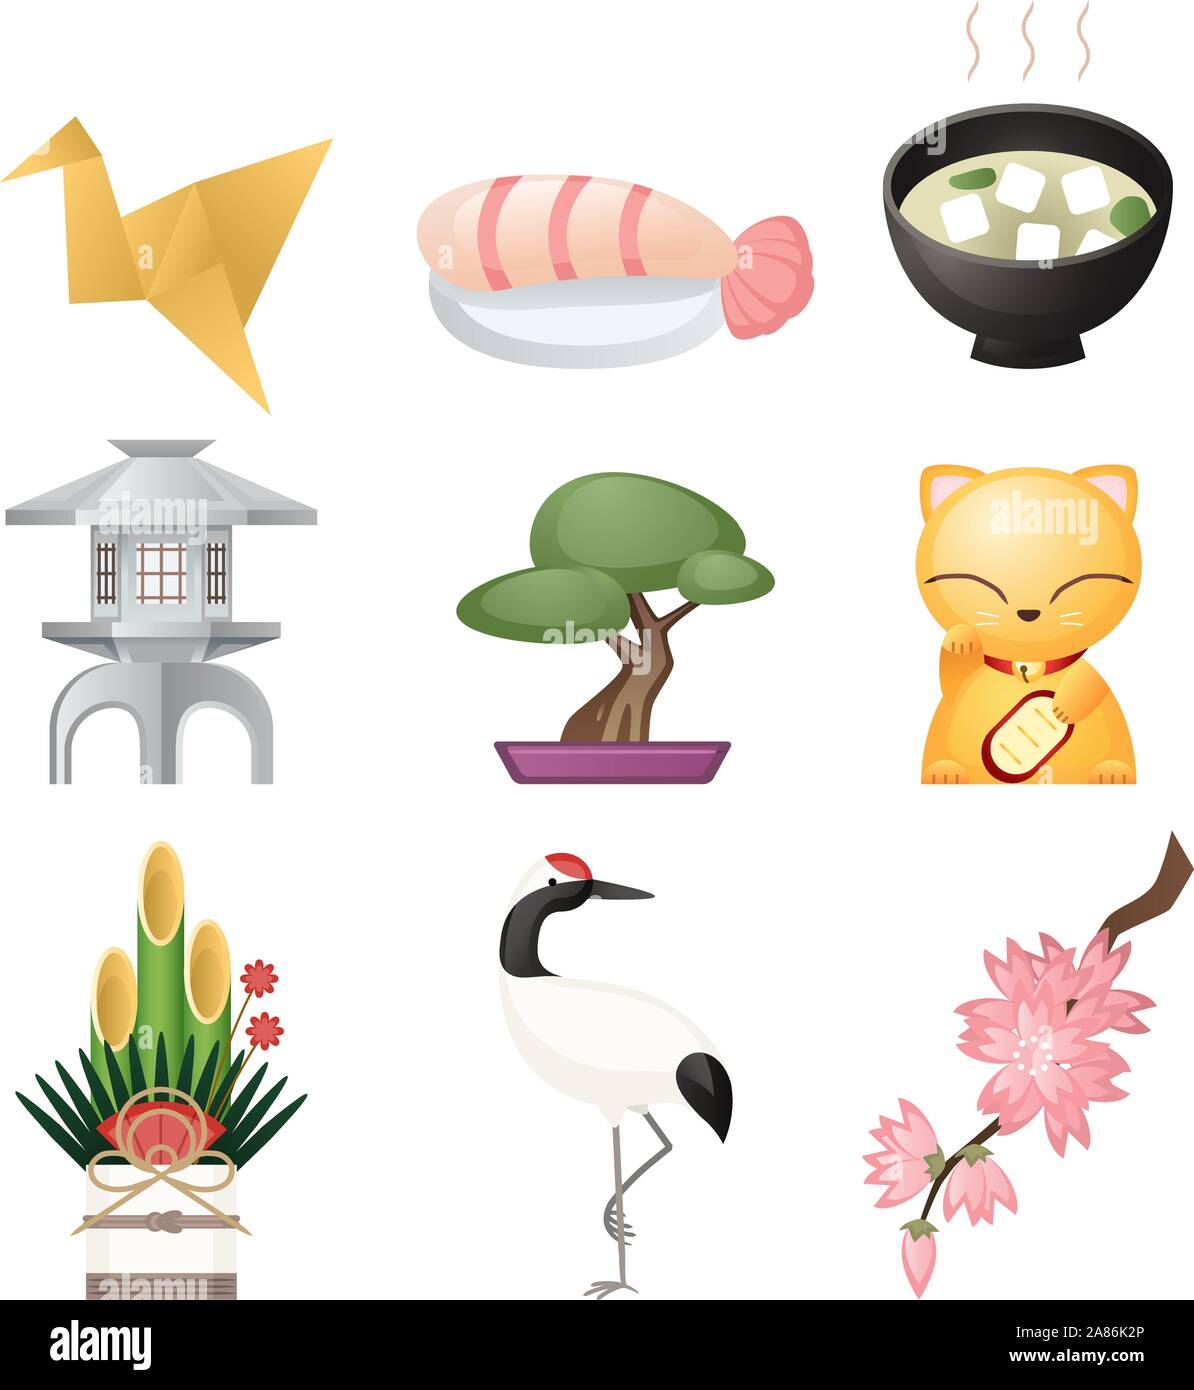 Japanese culture icon set, cultural elements like: origami, fish, sushi, luck cat, lucky cat, floral arrangement, noodles. Vector illustration cartoon Stock Vector